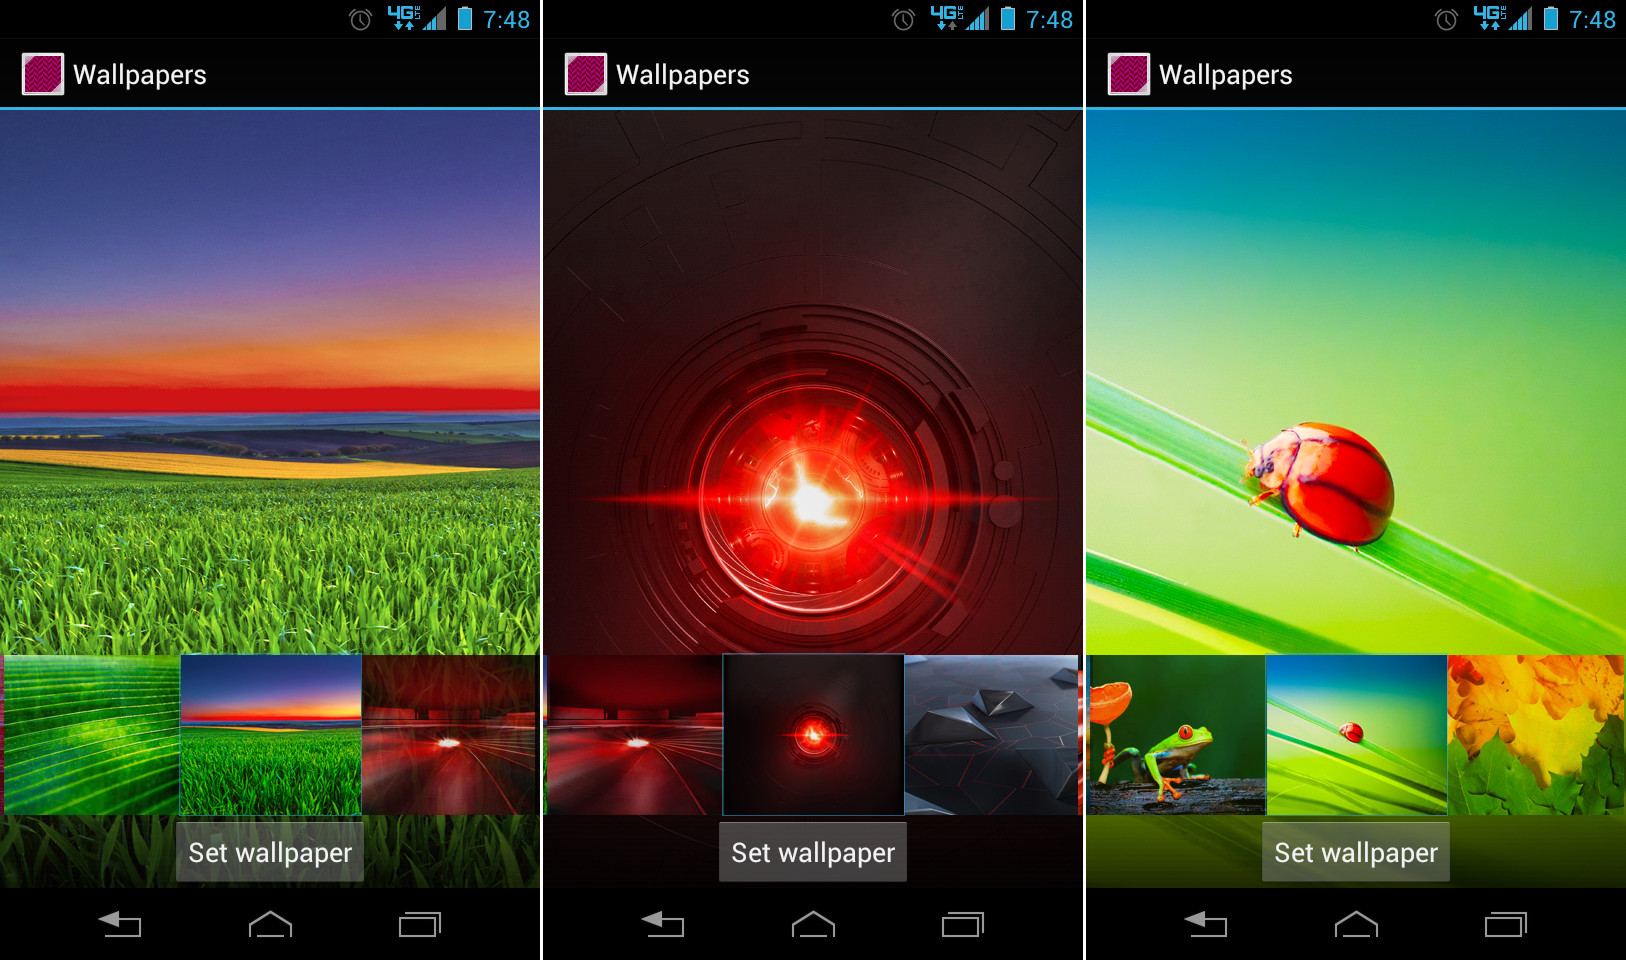 app store wallpaper,colorfulness,technology,screenshot,sky,electronic device